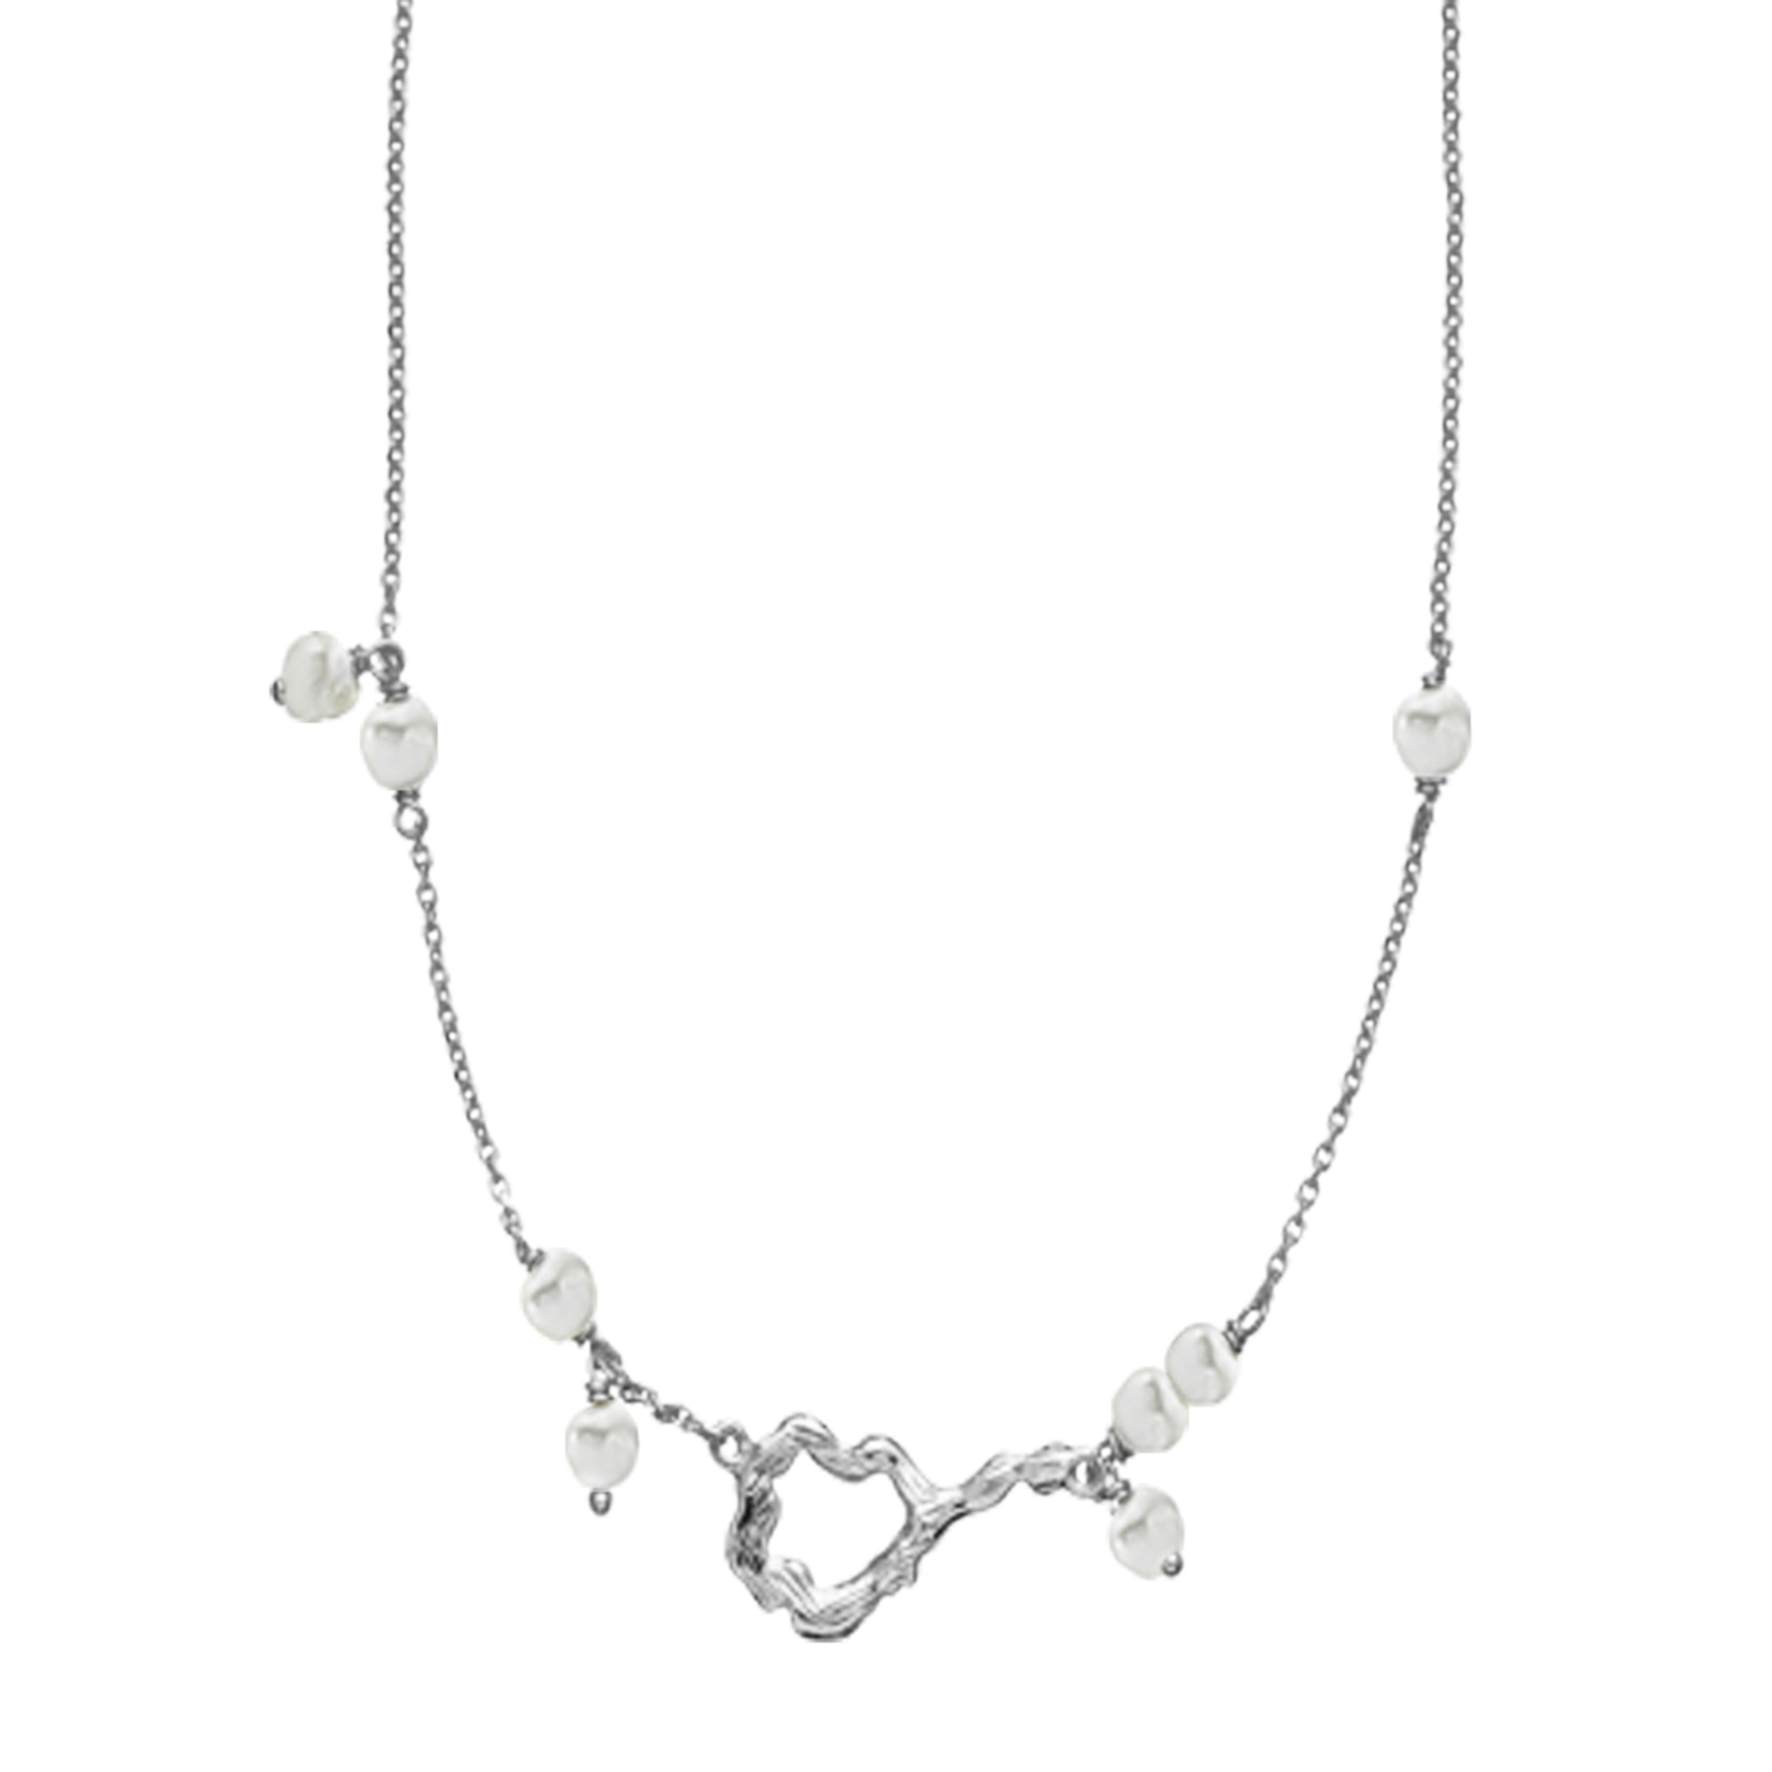 Lærke Bentsen By Sistie Necklace With Pearls from Sistie in Silver Sterling 925|Freshwater Pearl